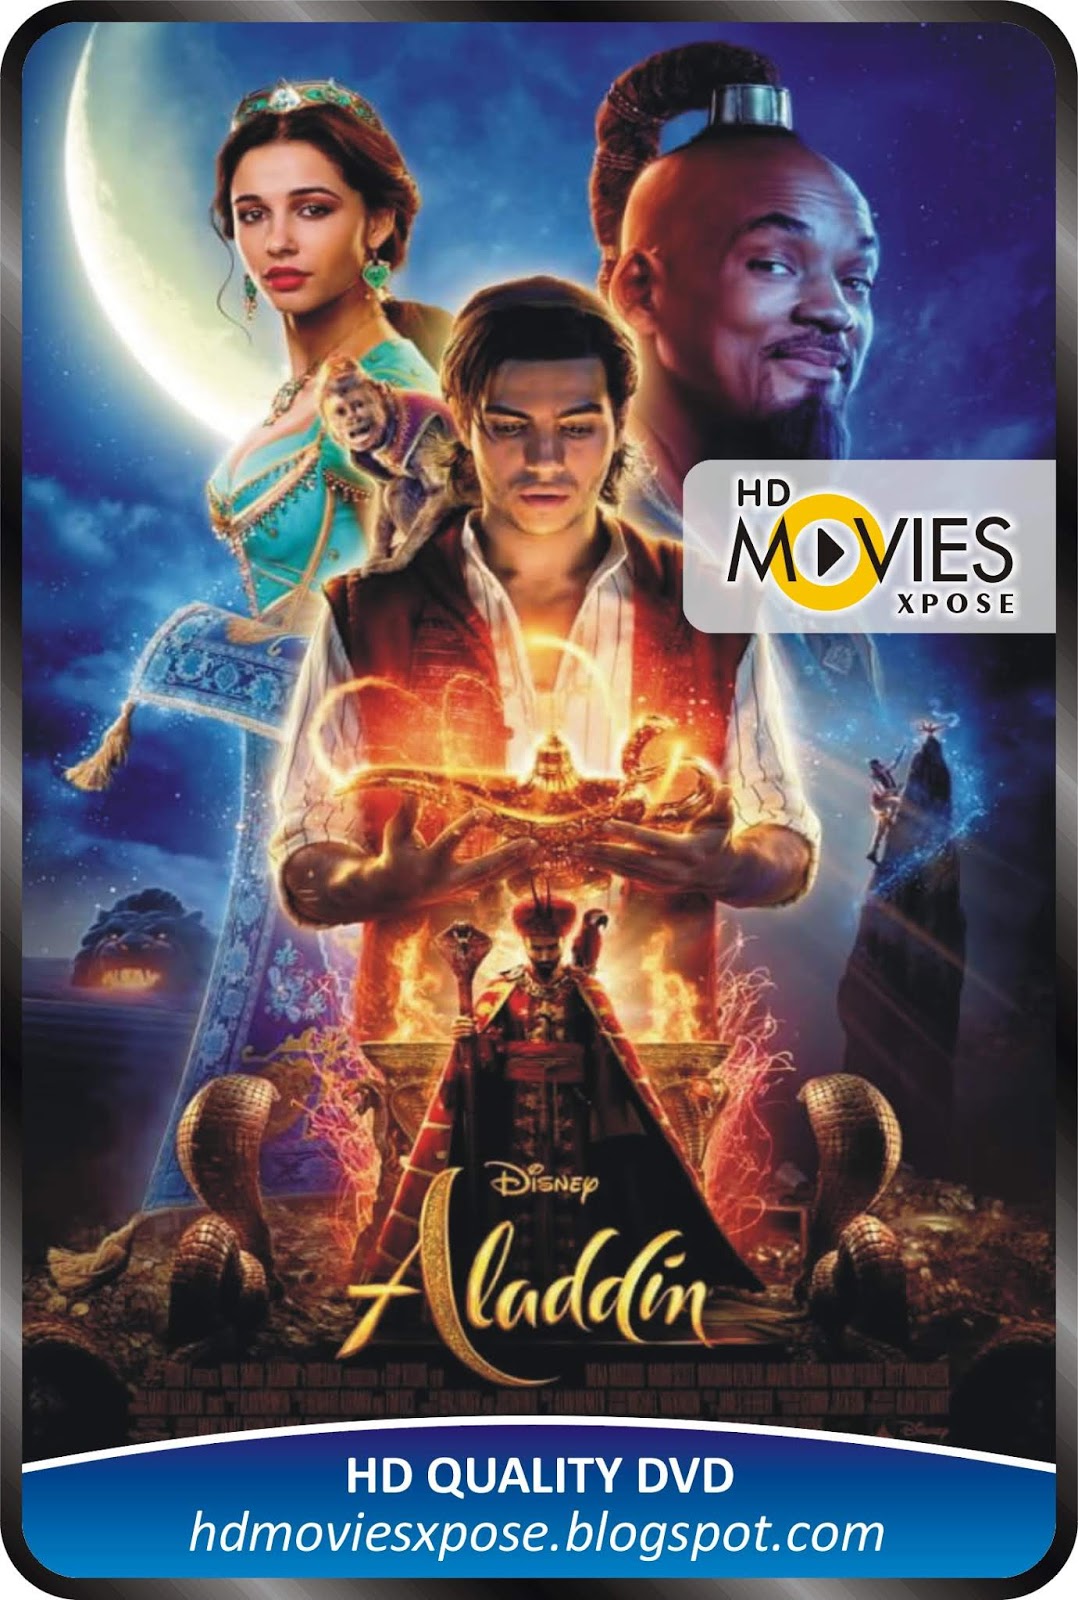 hollywood movies 2019 download hd